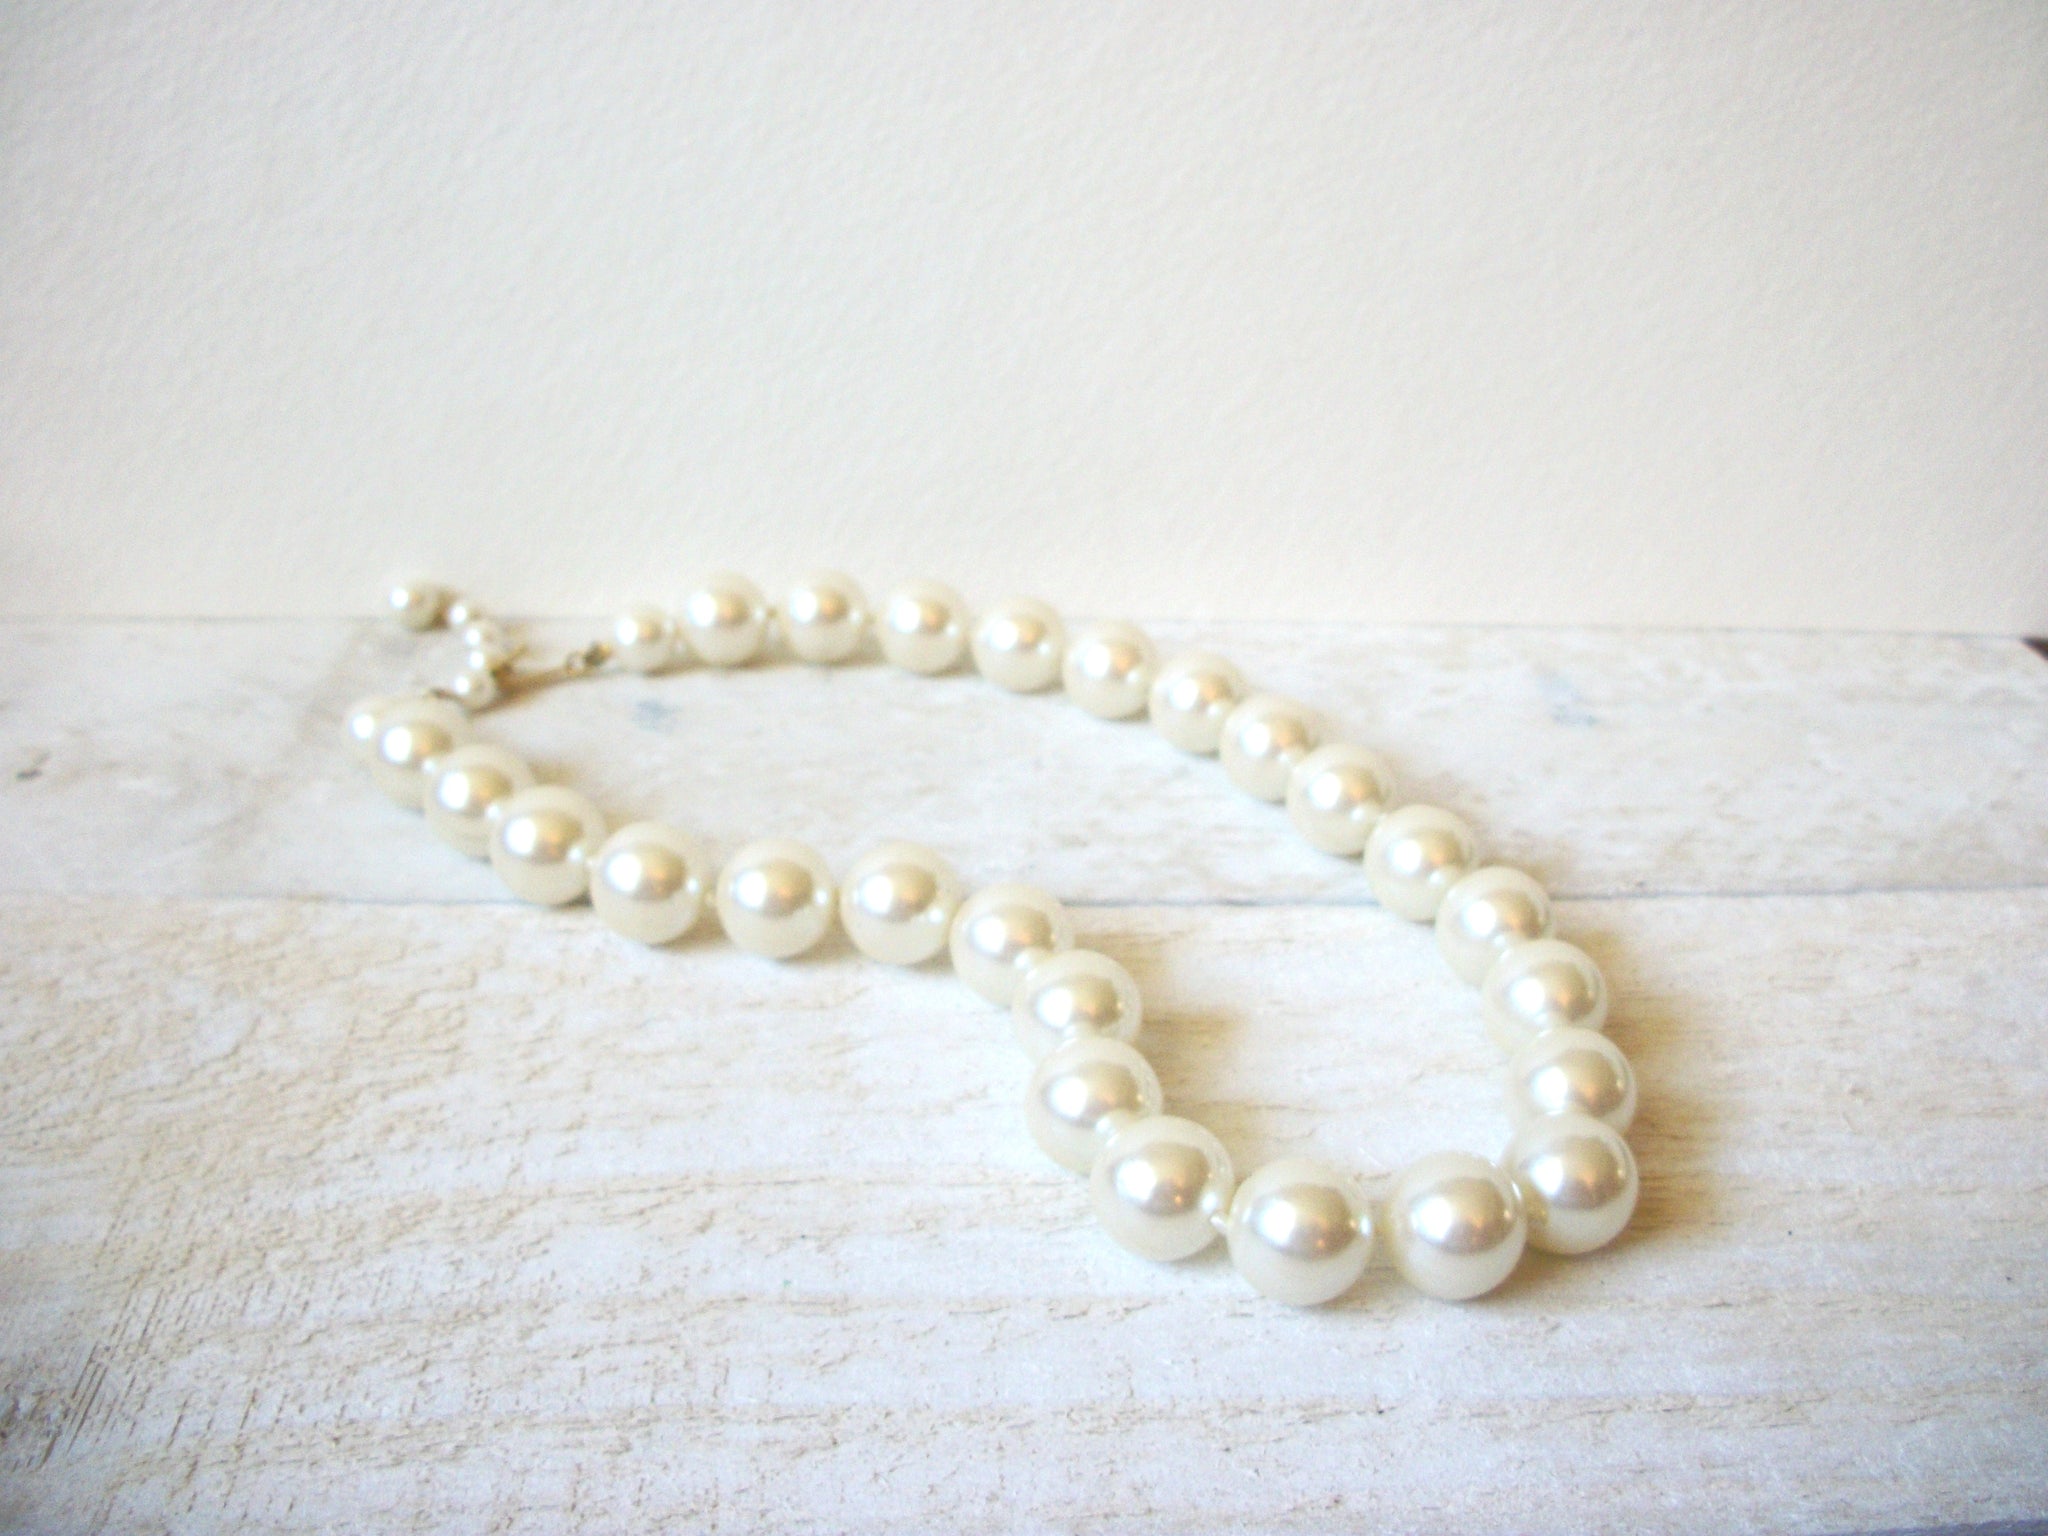 Vintage Glass Pearl Necklace 61420